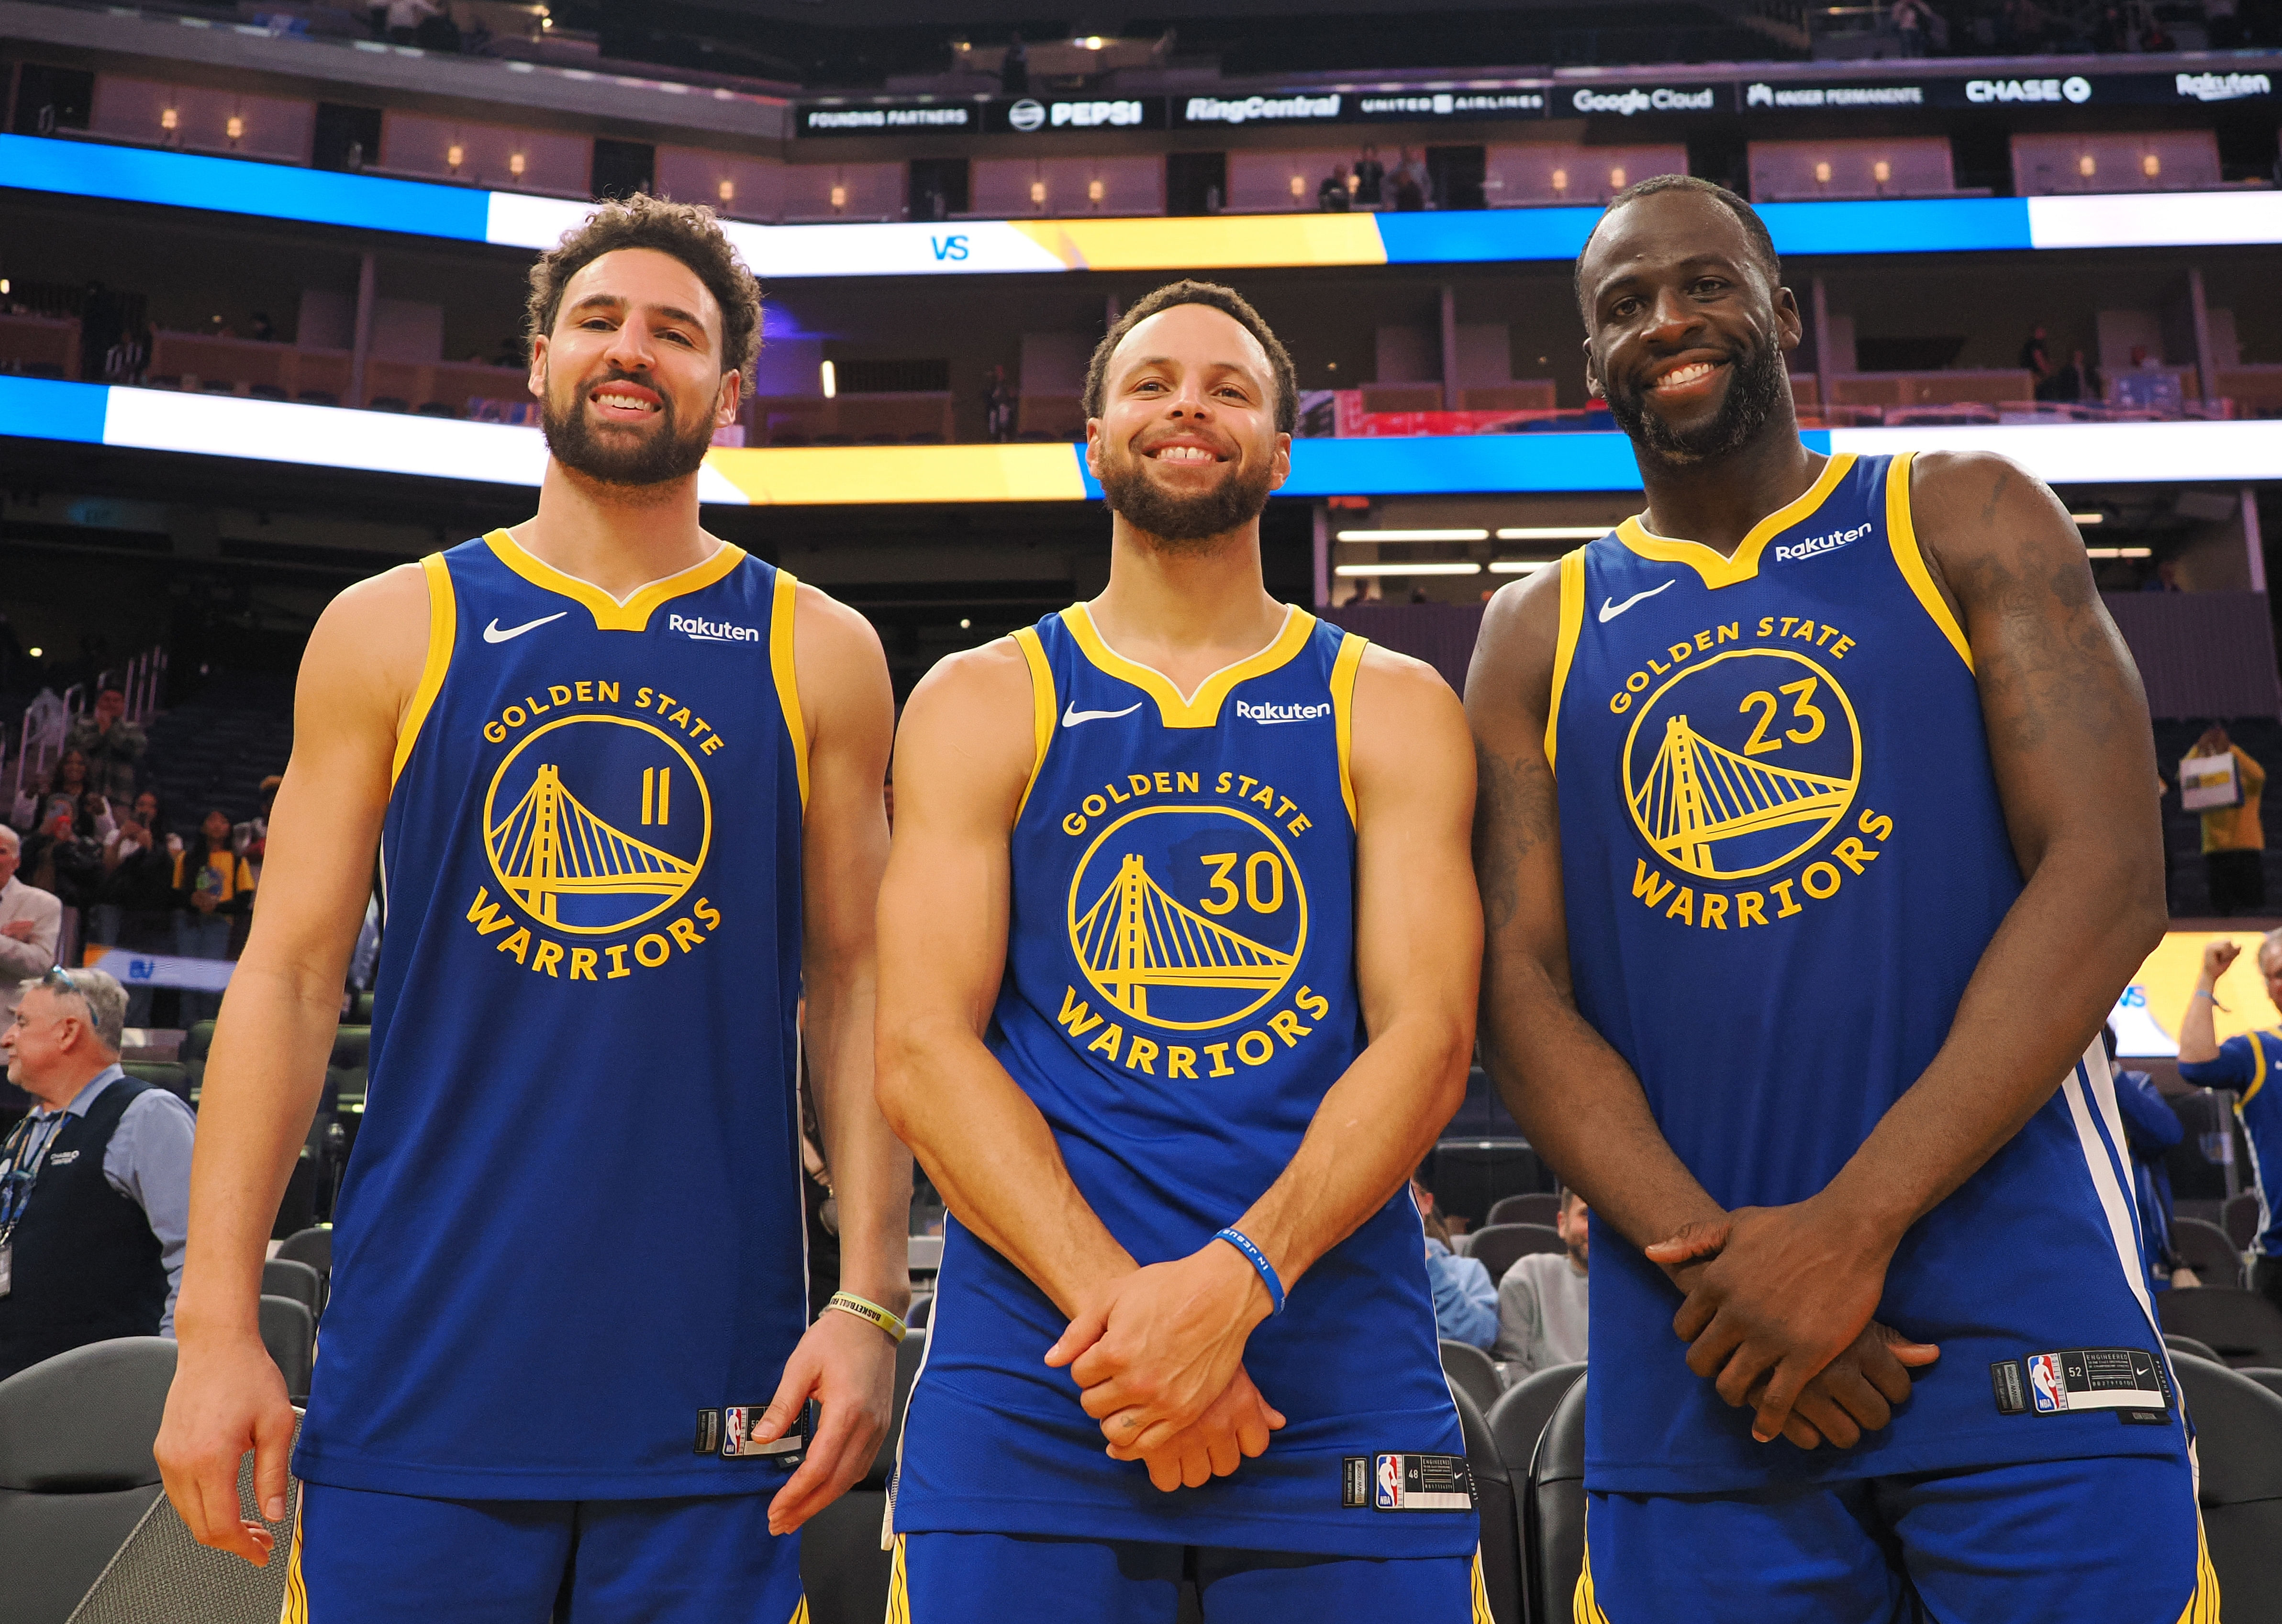 Golden State Warriors guards Stephen Curry and Klay Thompson and forward Draymond Green